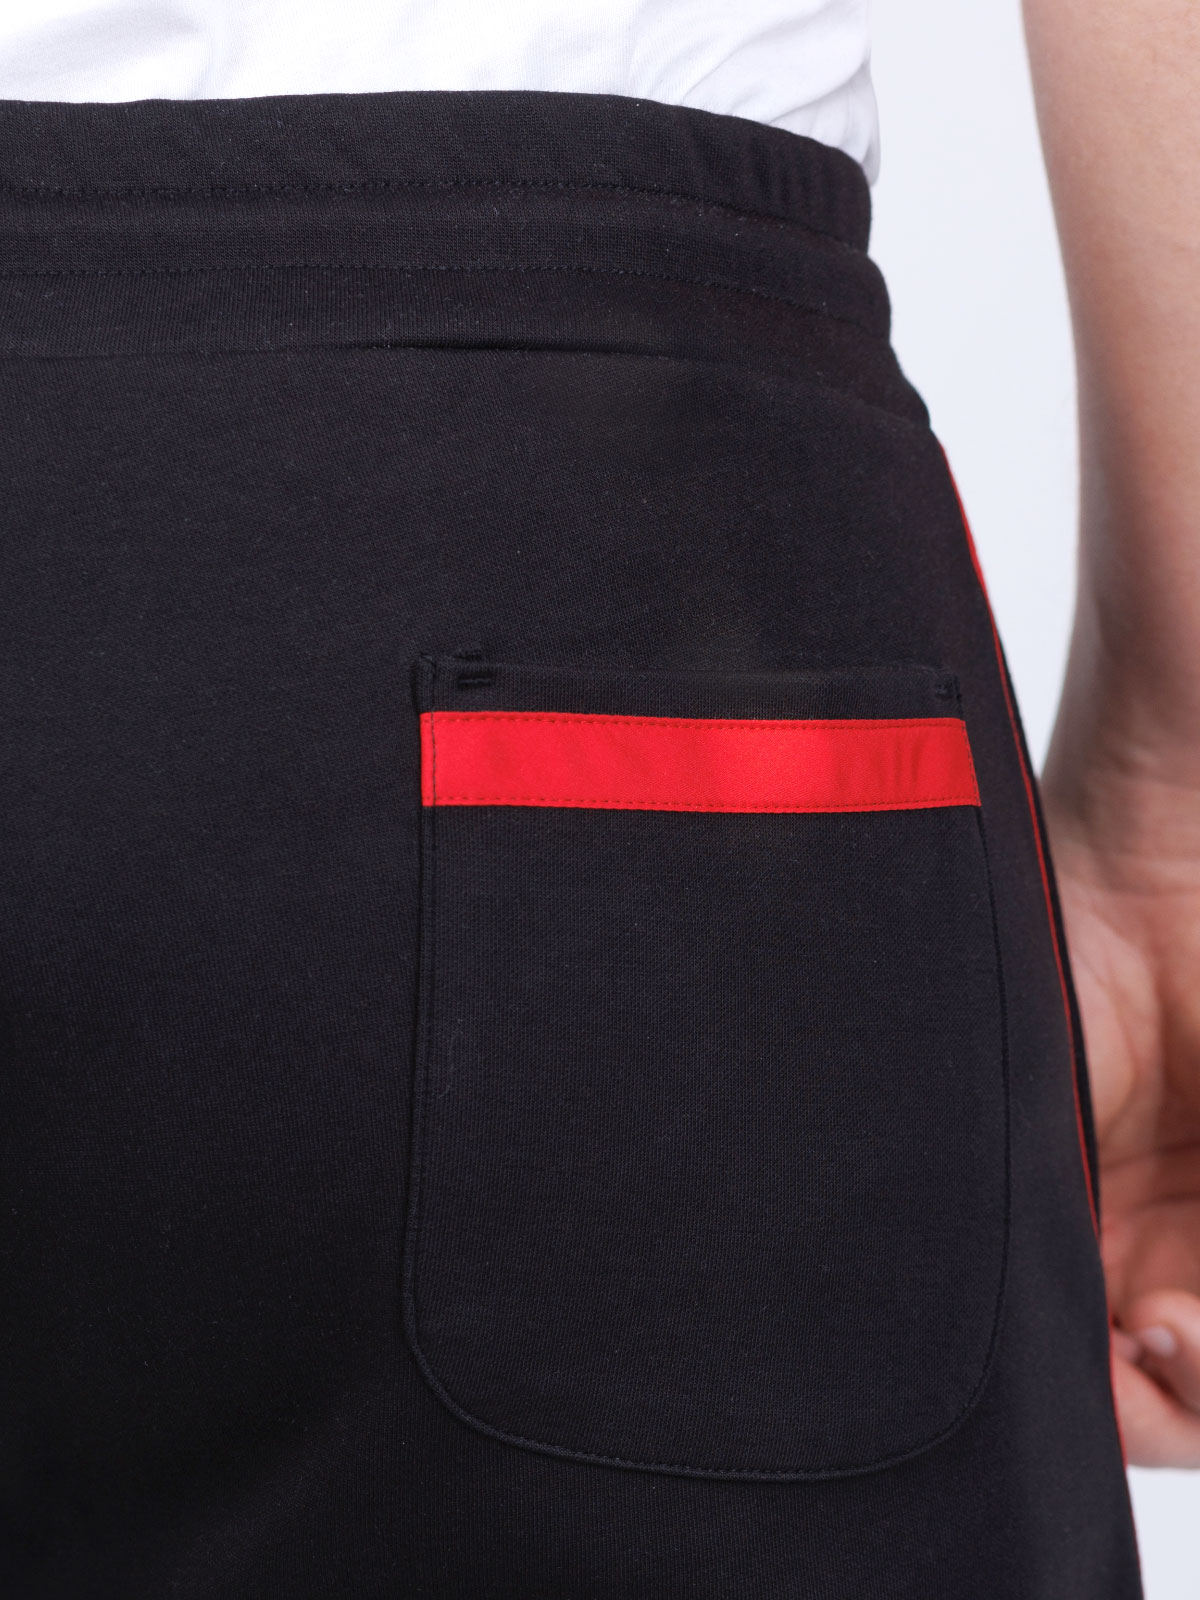 Sports bottom with red stripe - 29002 € 33.18 img4